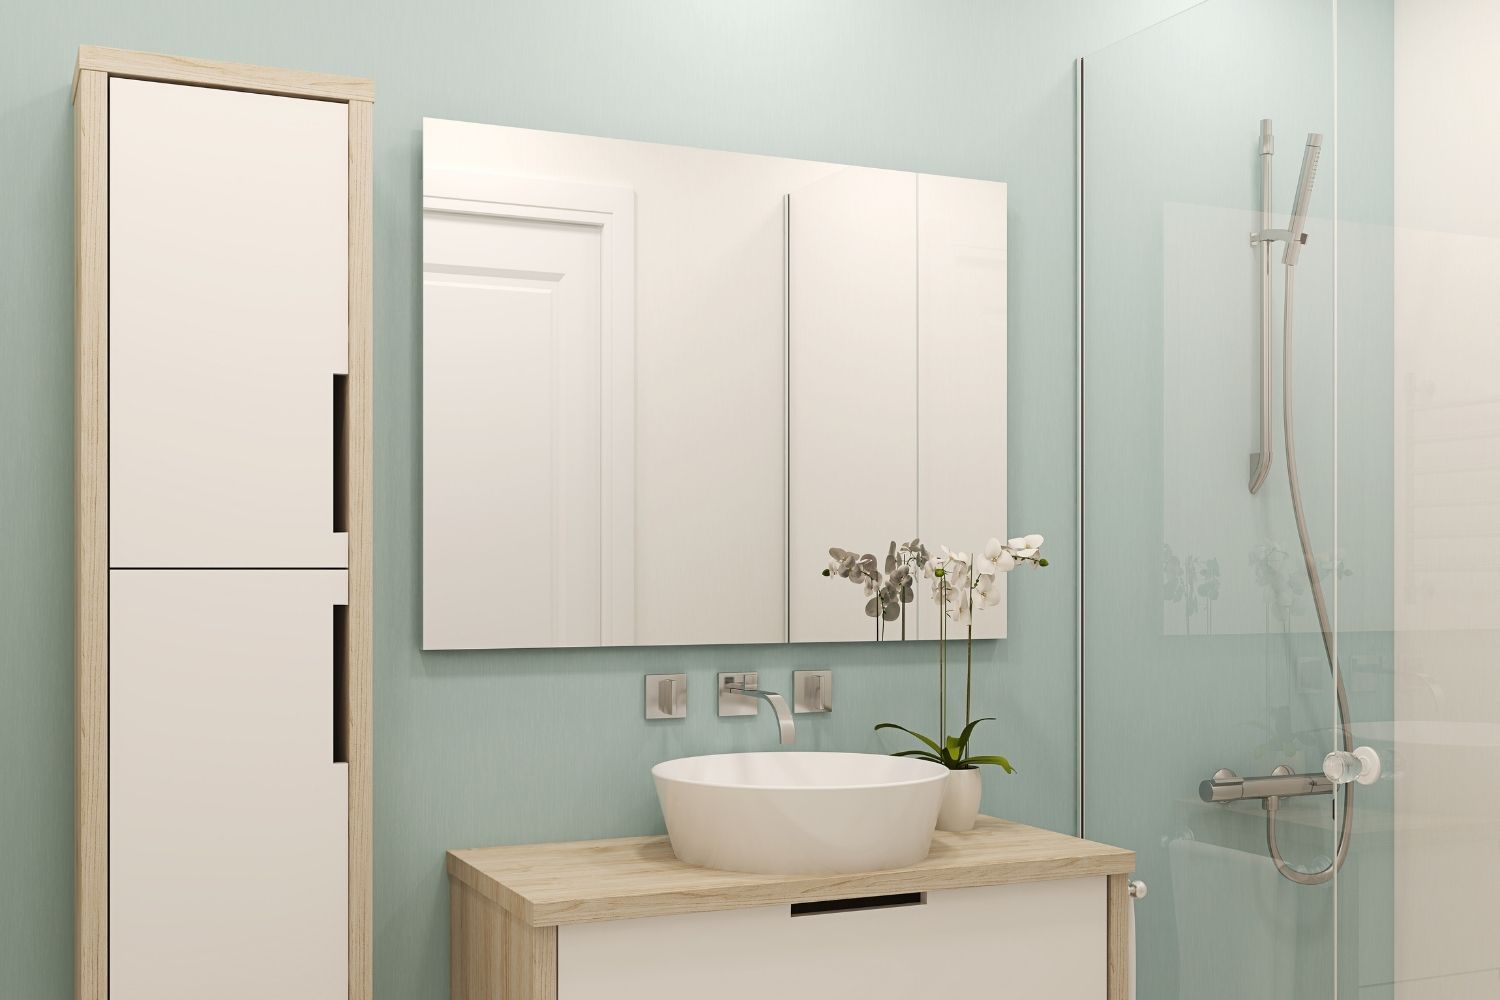 13 of the Best Paint Colors for Small Bathrooms Without Windows - Explore Wall Decor